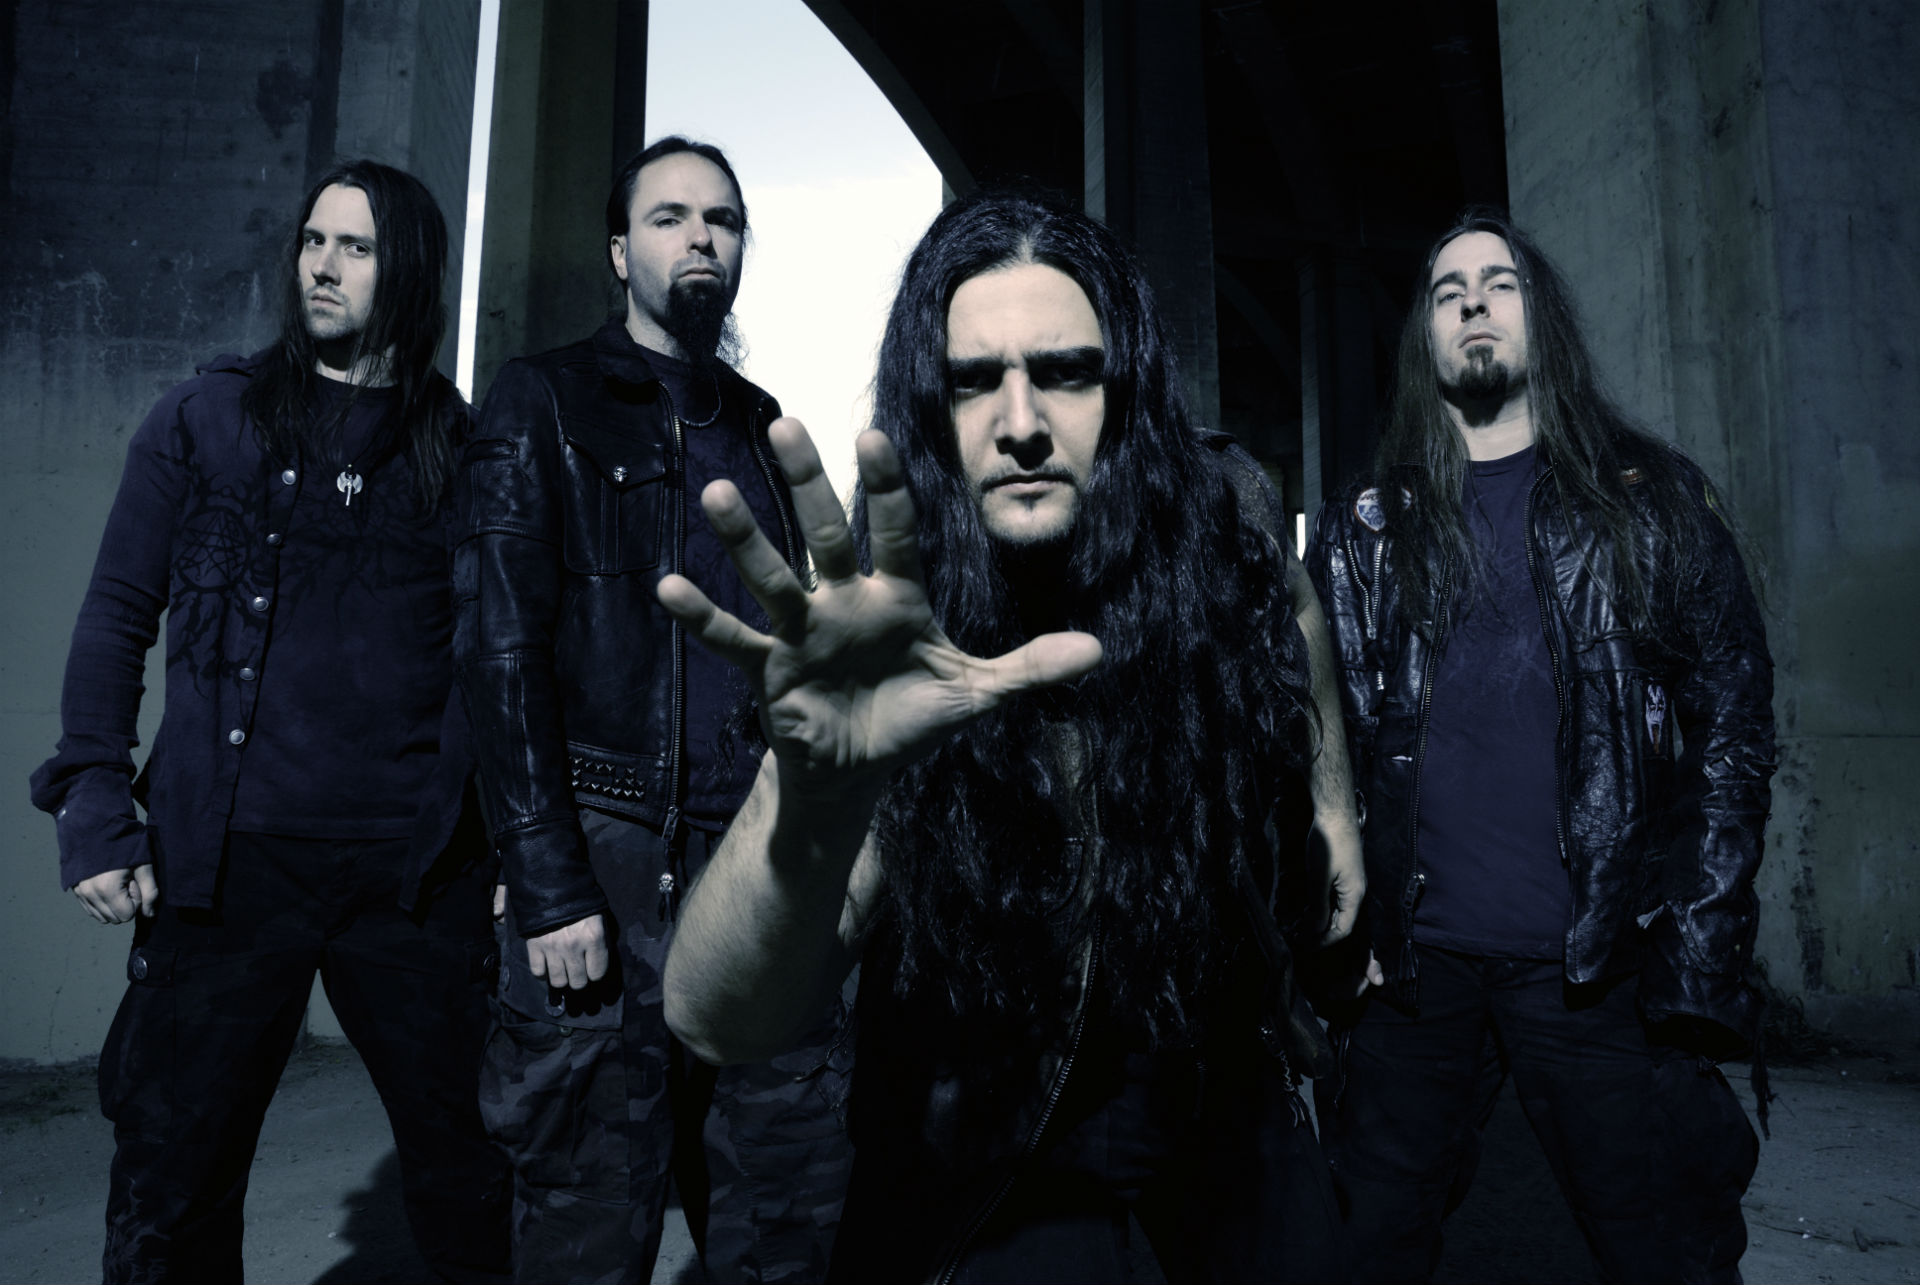 band, heavy metal, hard rock, kataklysm collection of HD images